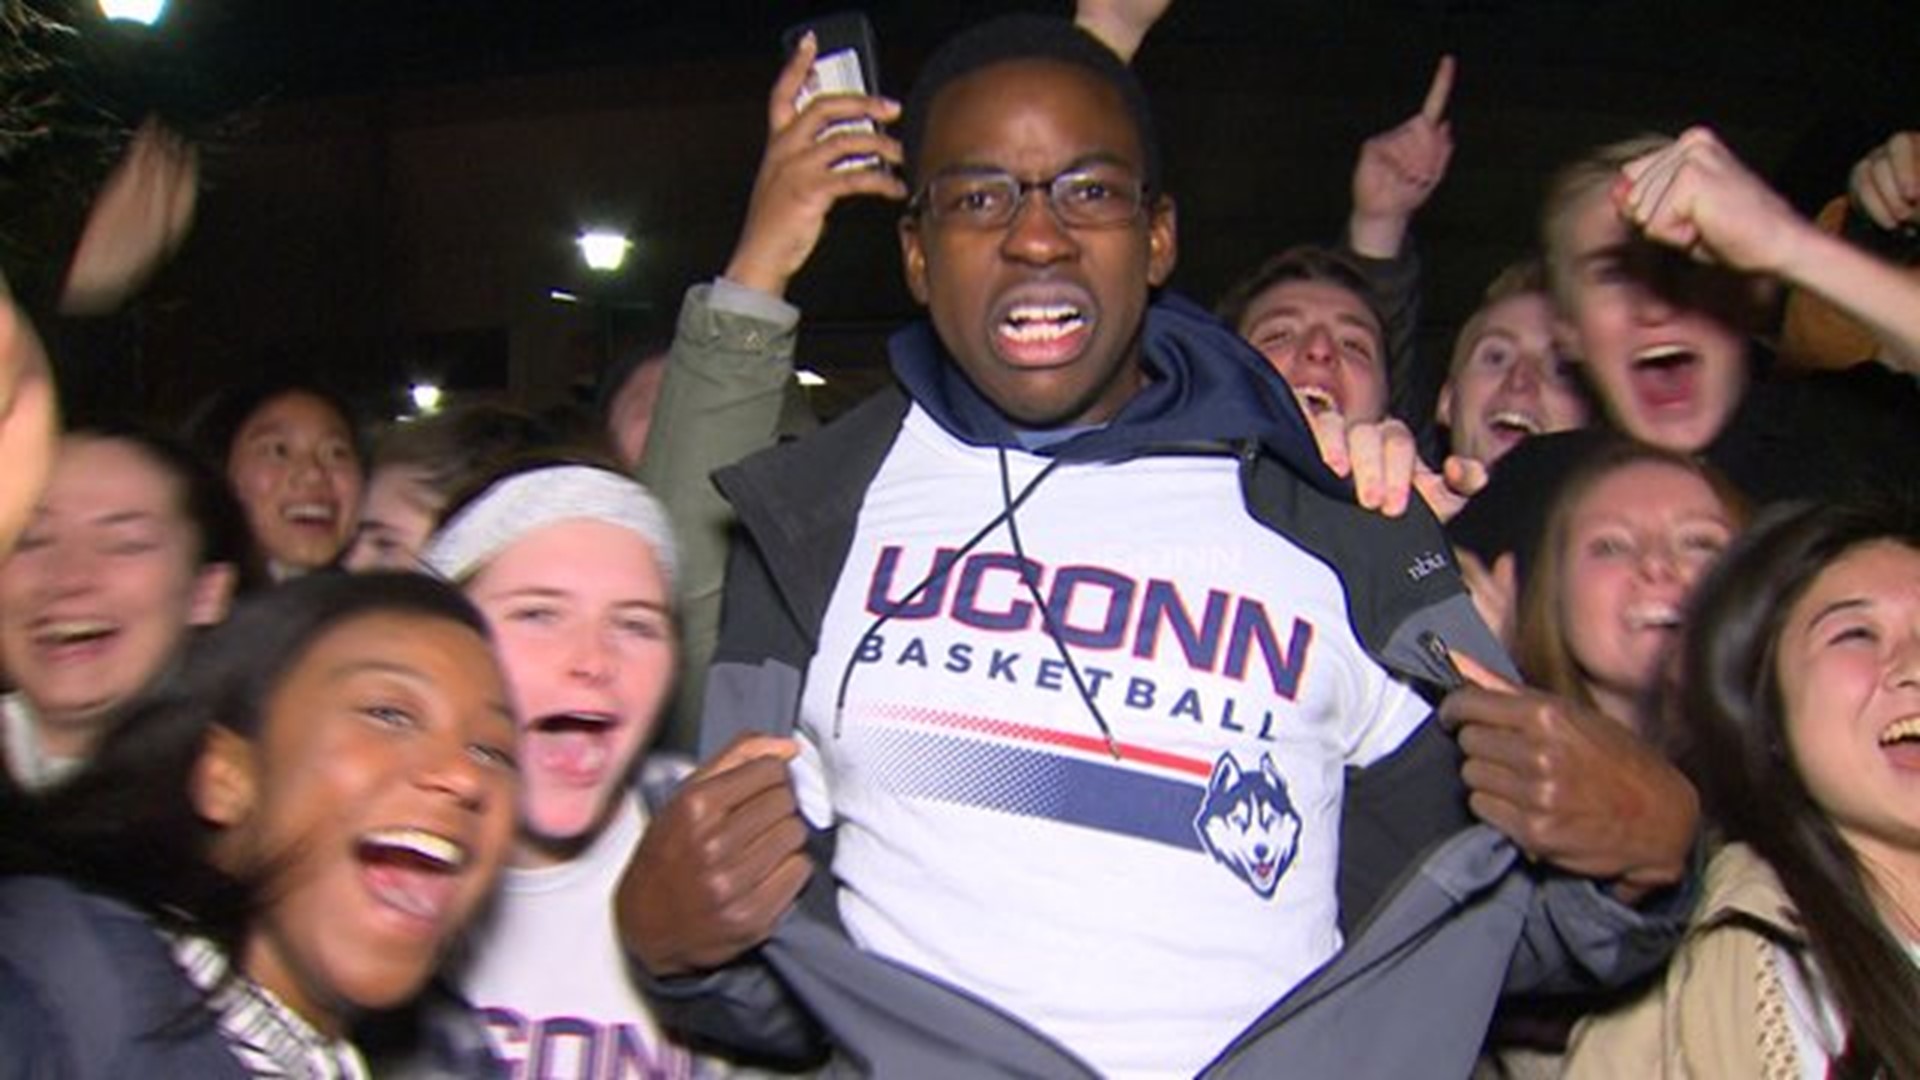 UConn fans riding high after 100th win